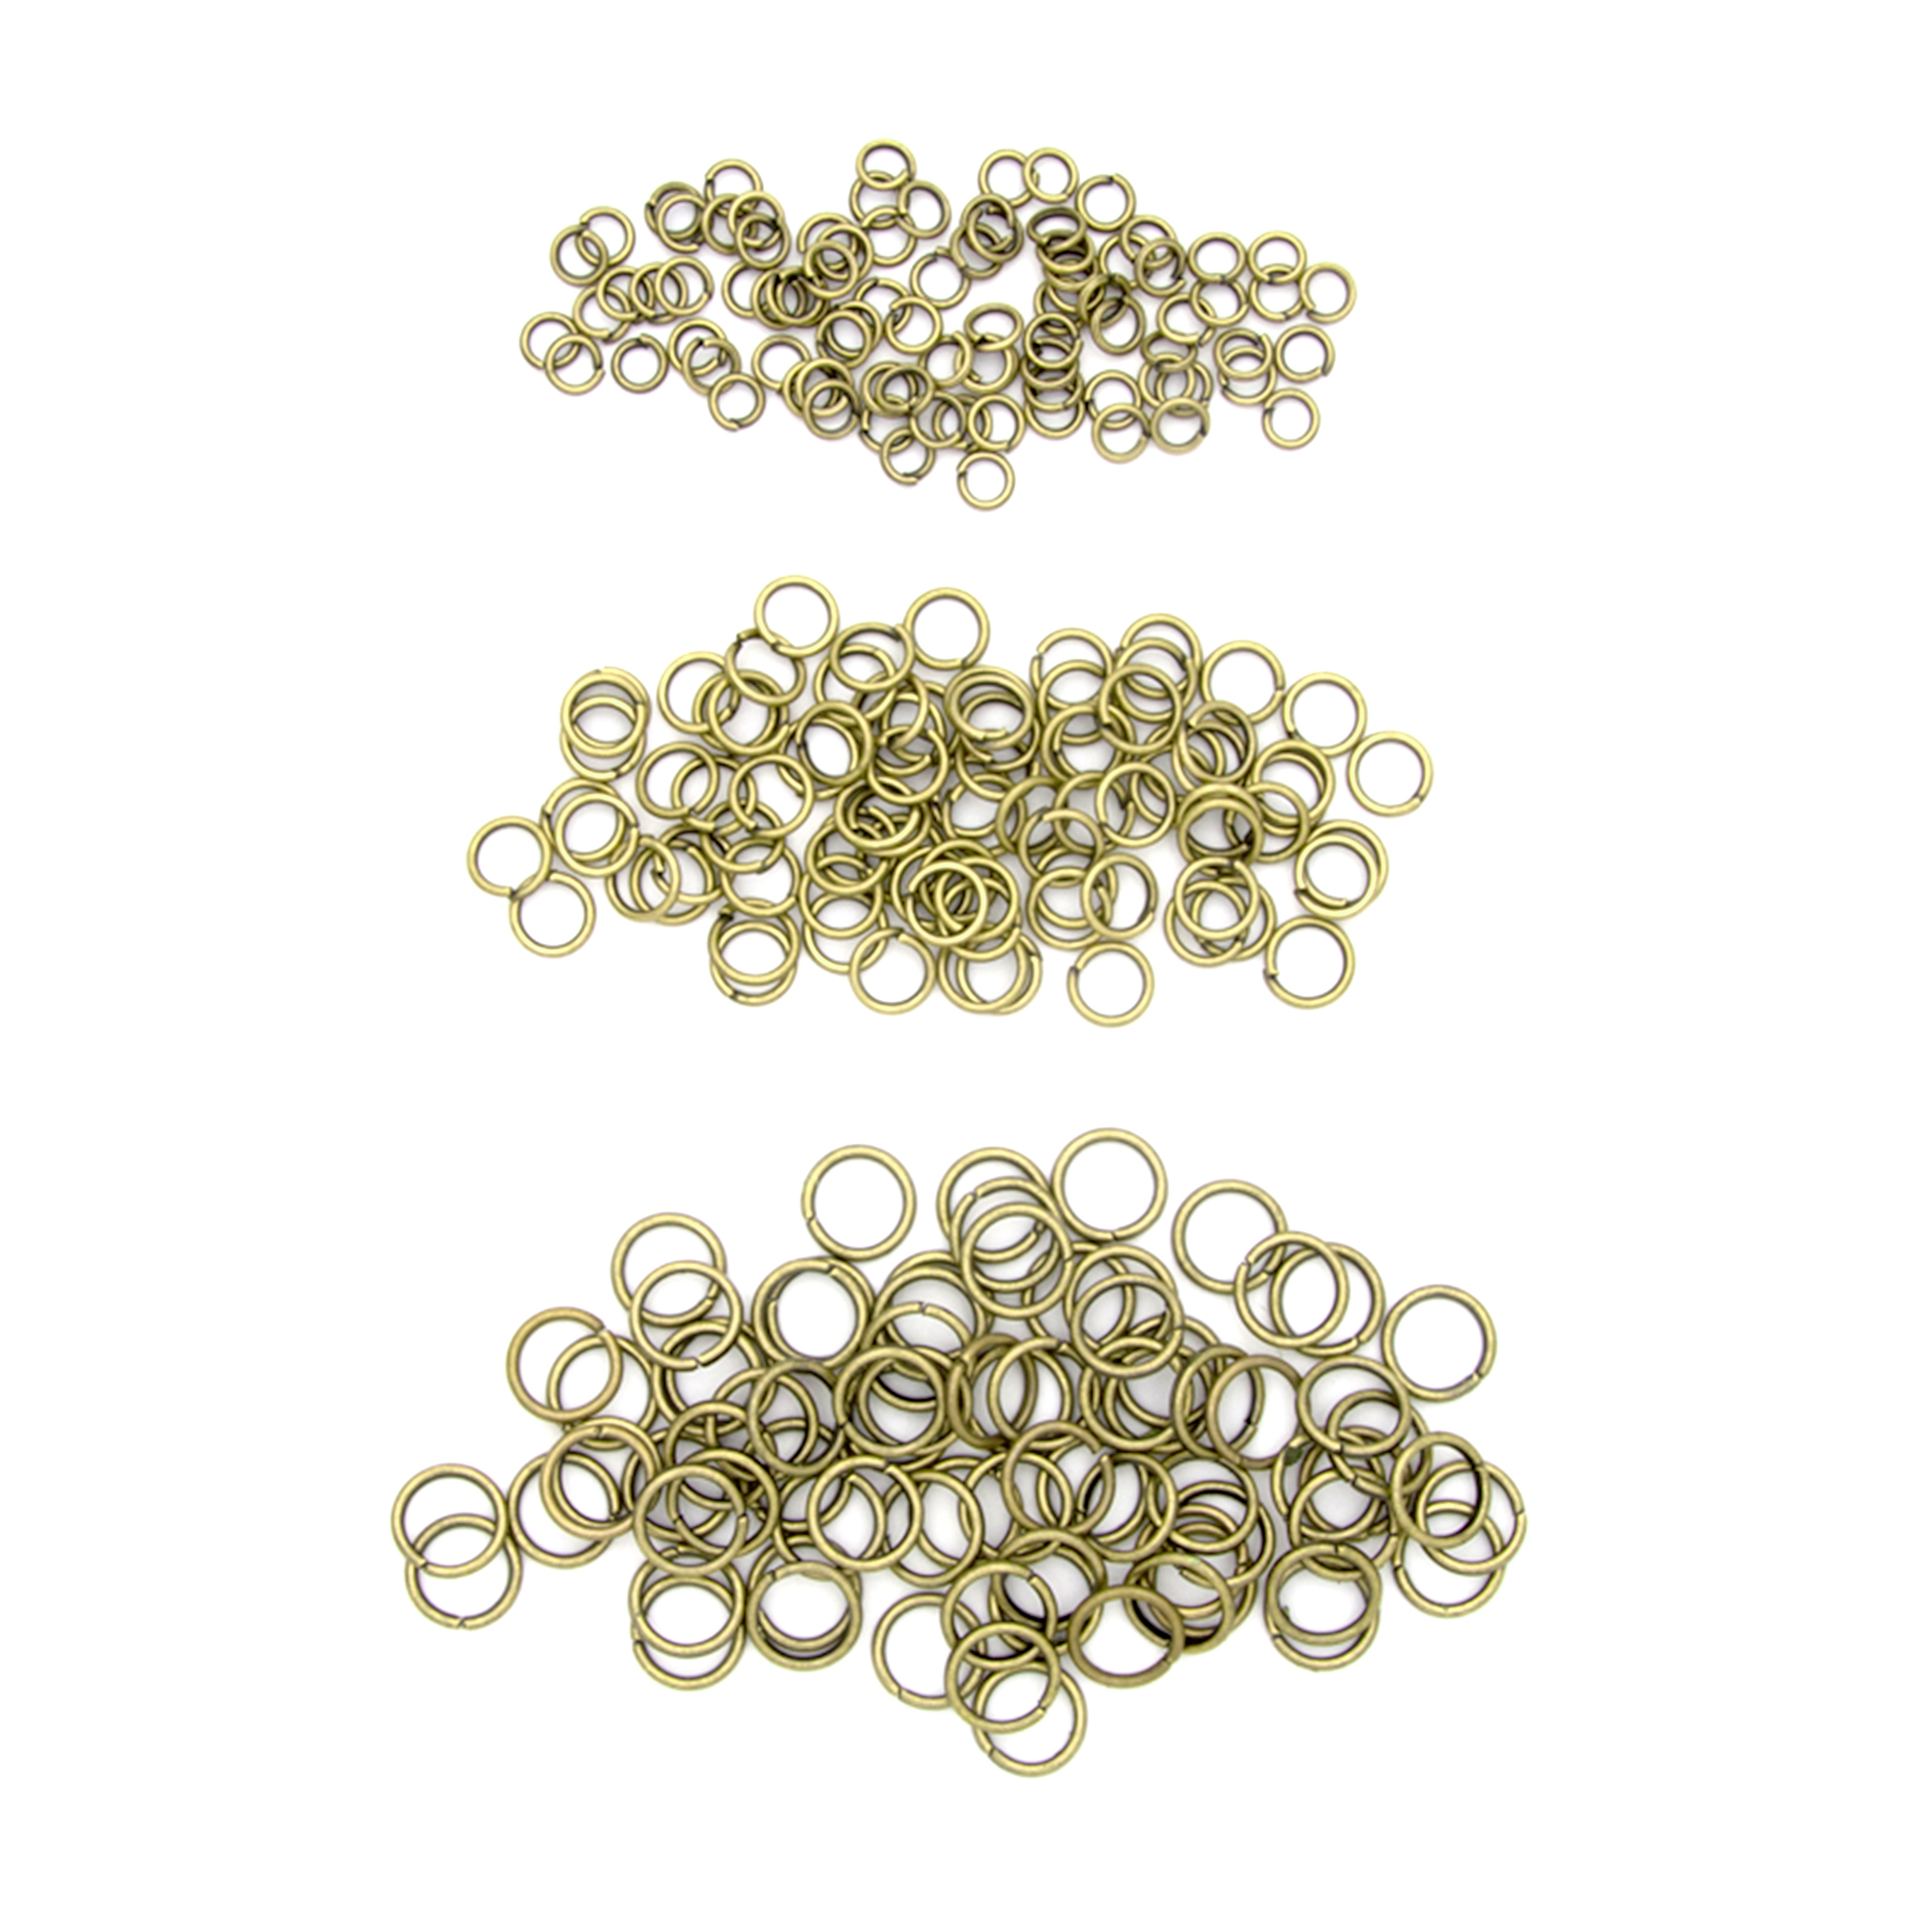 Cousin DIY Metal 4mm, 6mm, and 8mm Jump Rings Set, 240 Piece, Gold Finish 